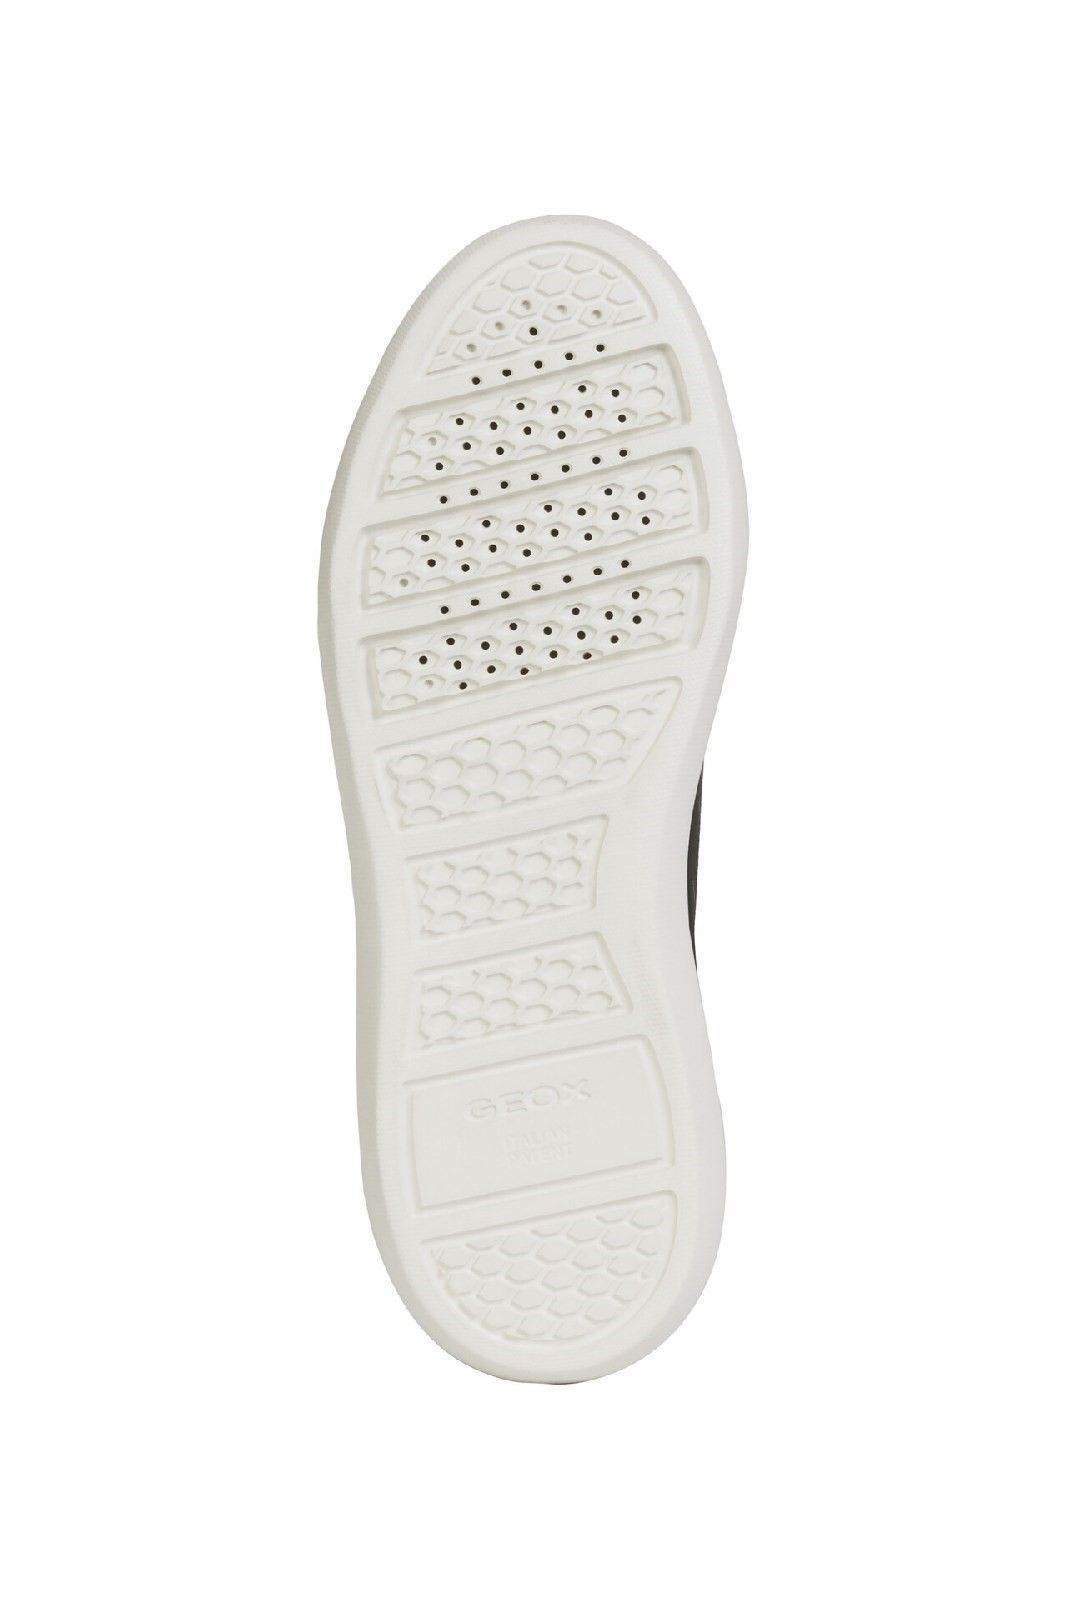 The Geox rubber sole is based on an exclusive patent: the combination of the perforated sole and the breathable and waterproof membrane allow natural temperature regulation, creating the perfect micro-climate that keeps feet dry and comfortable.Exclusive Patent. 
360 Degree breathability. 
Resistant outsole.